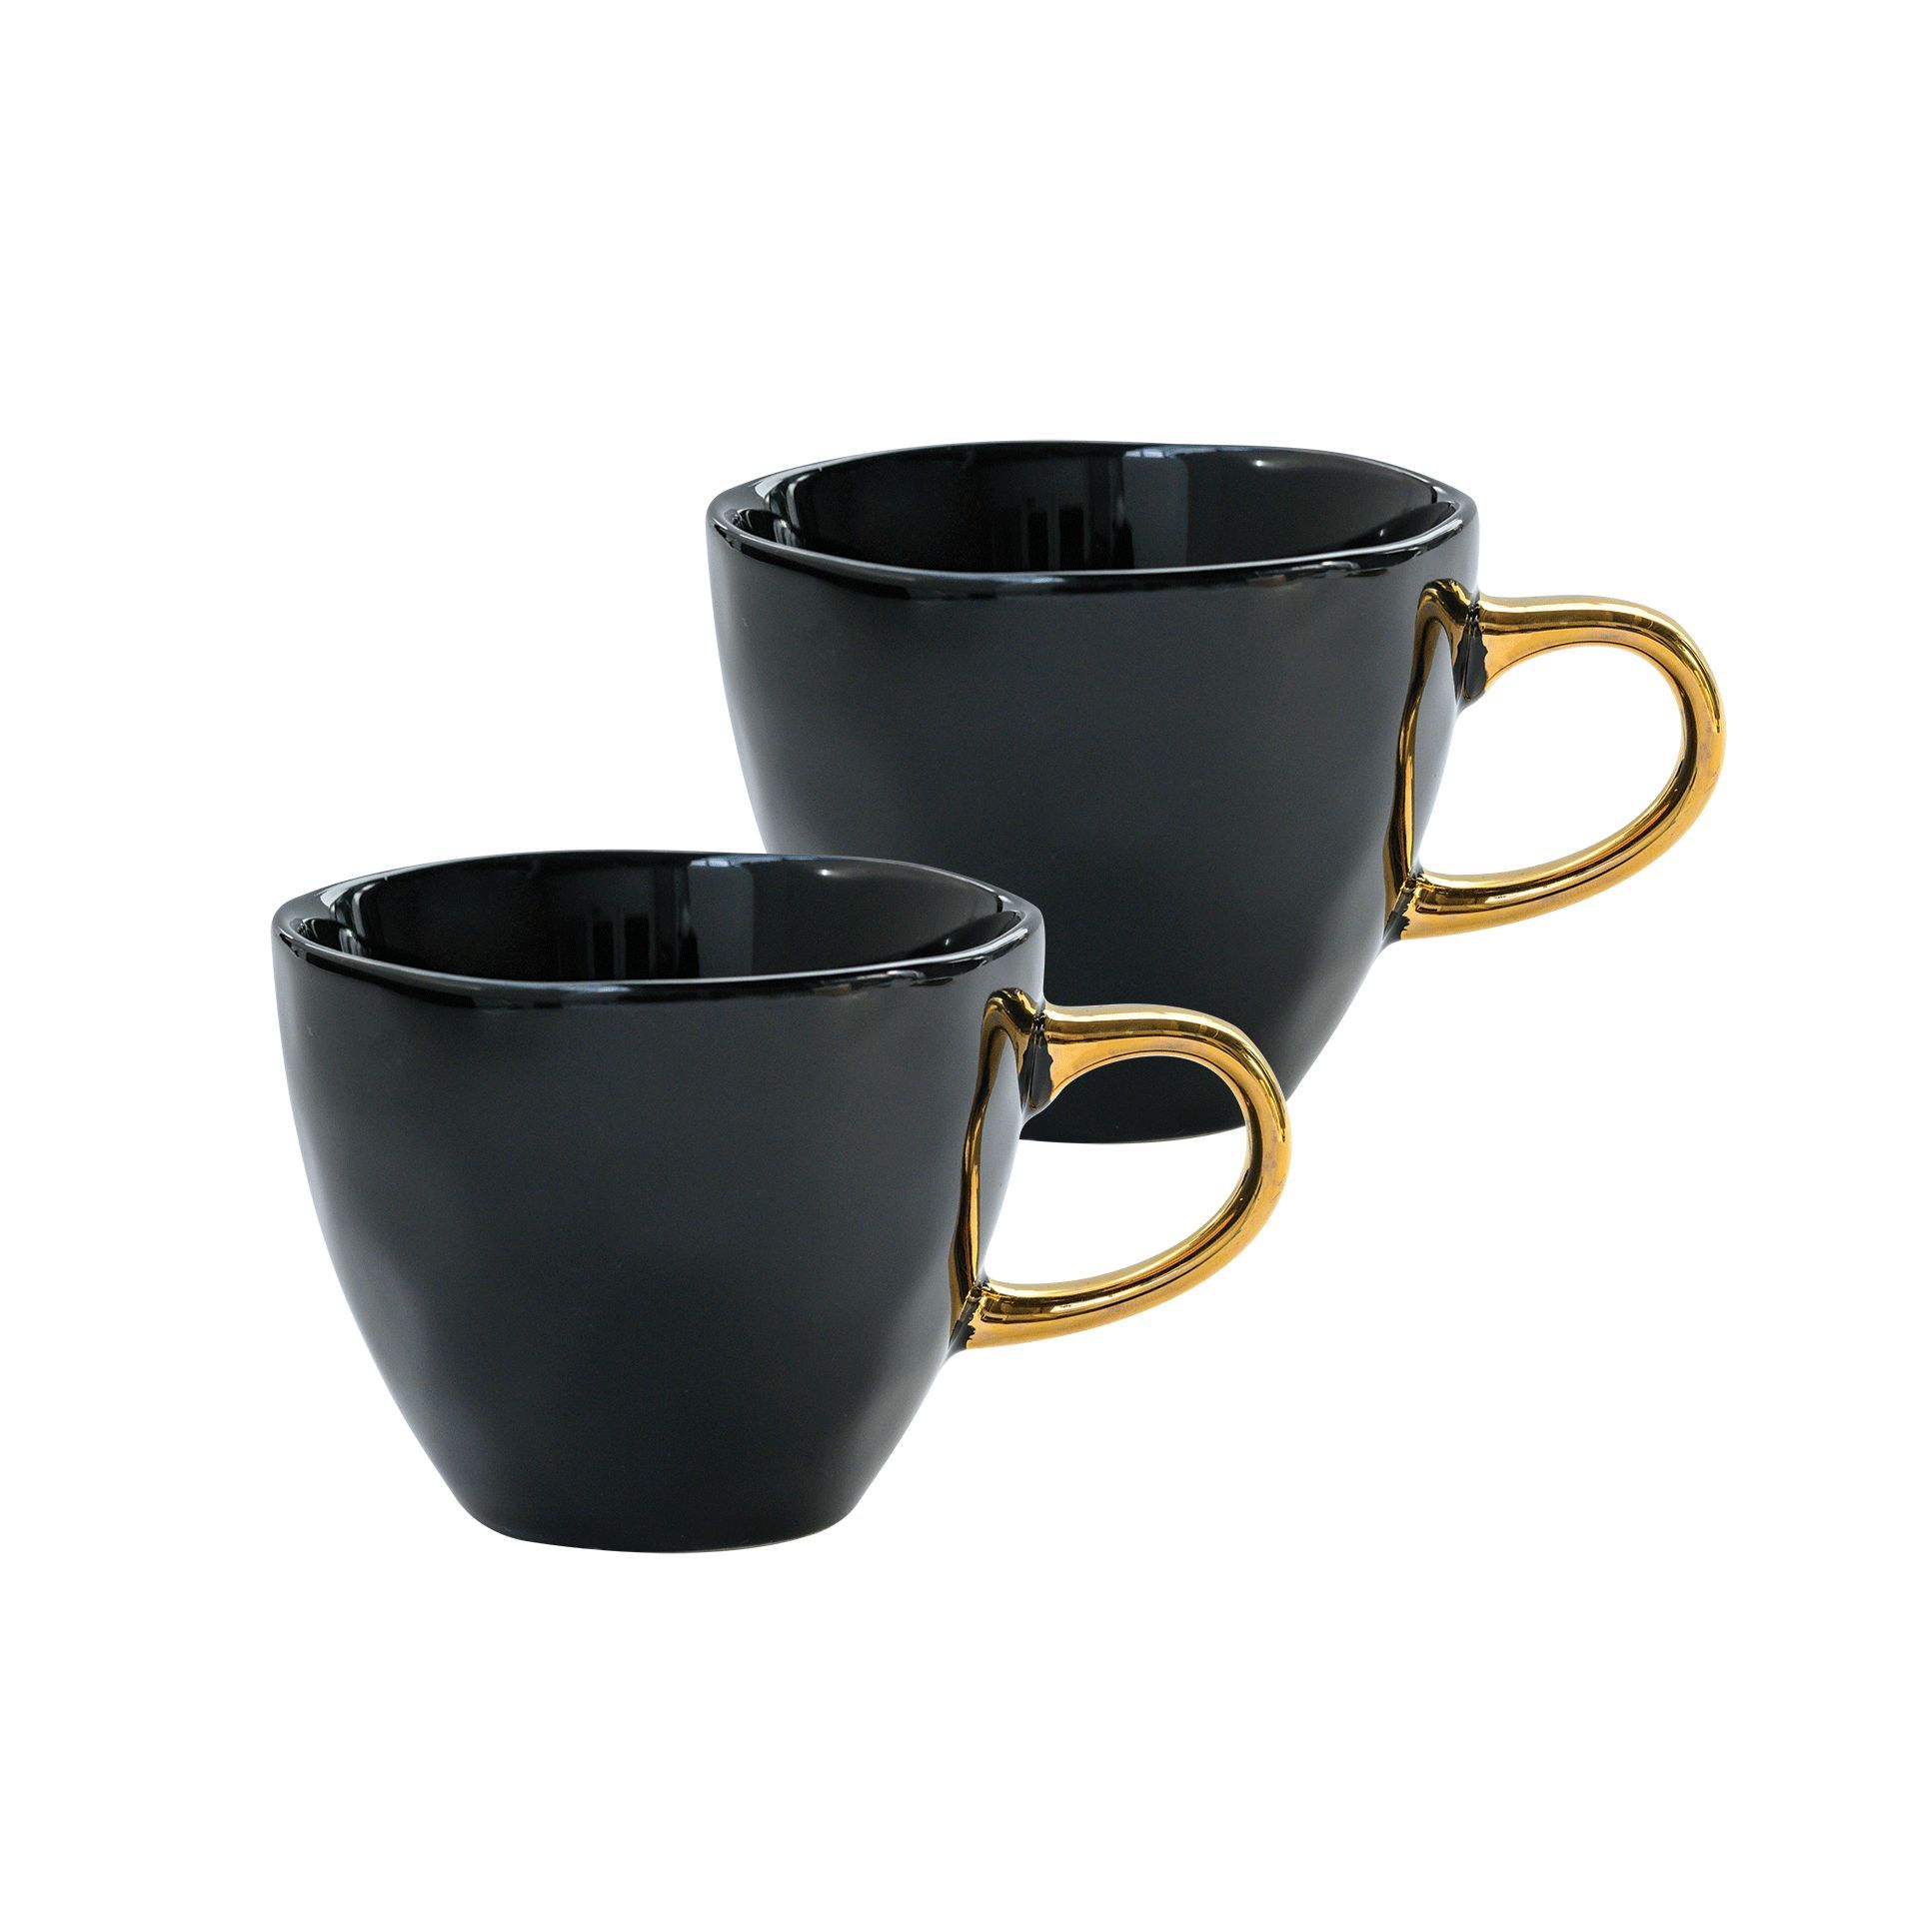 Unc Good Morning Cup Coffee Black S/2 Gift Pack Gift